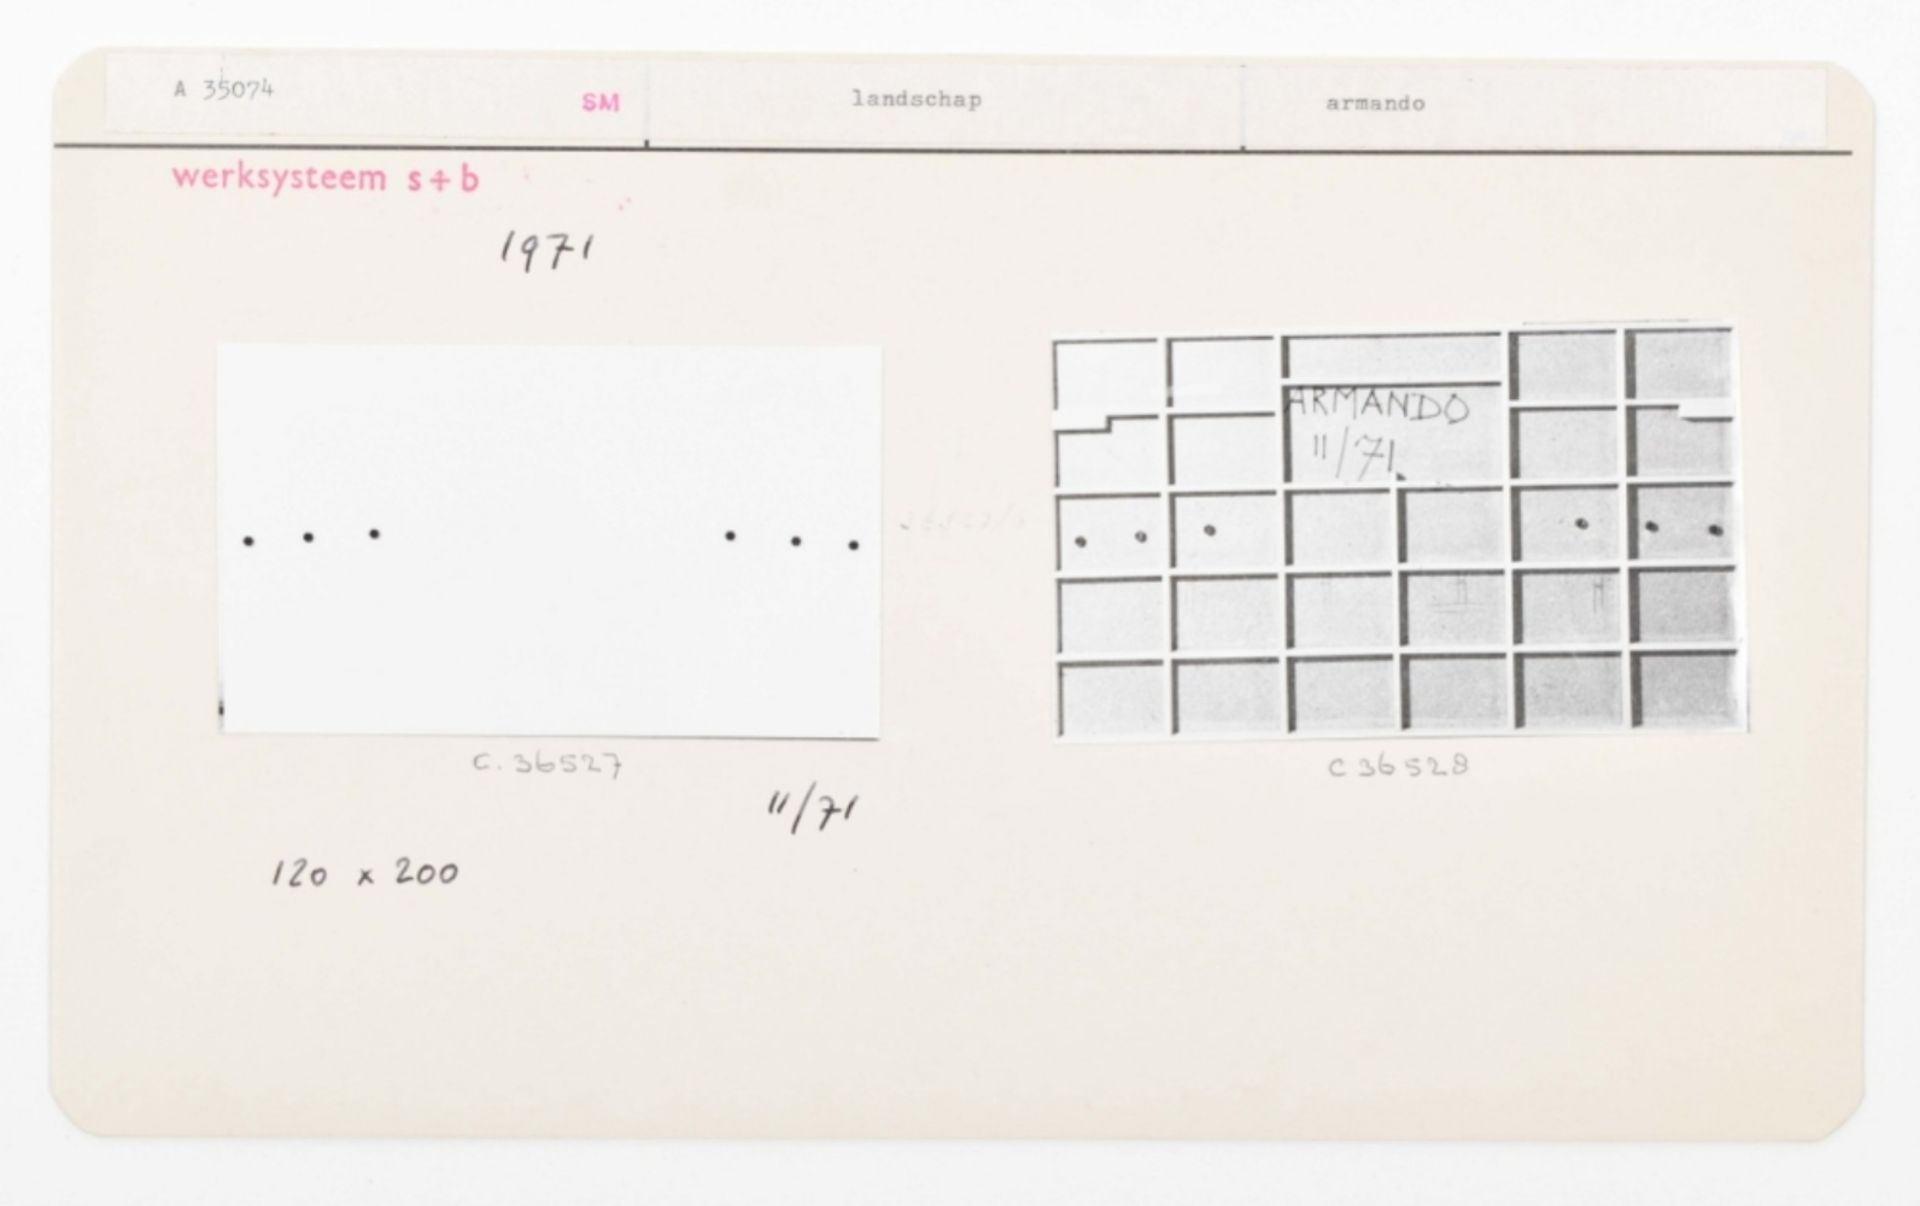 Armando, filing cards from the Stedelijk Museum, 1961-1971 - Image 6 of 6